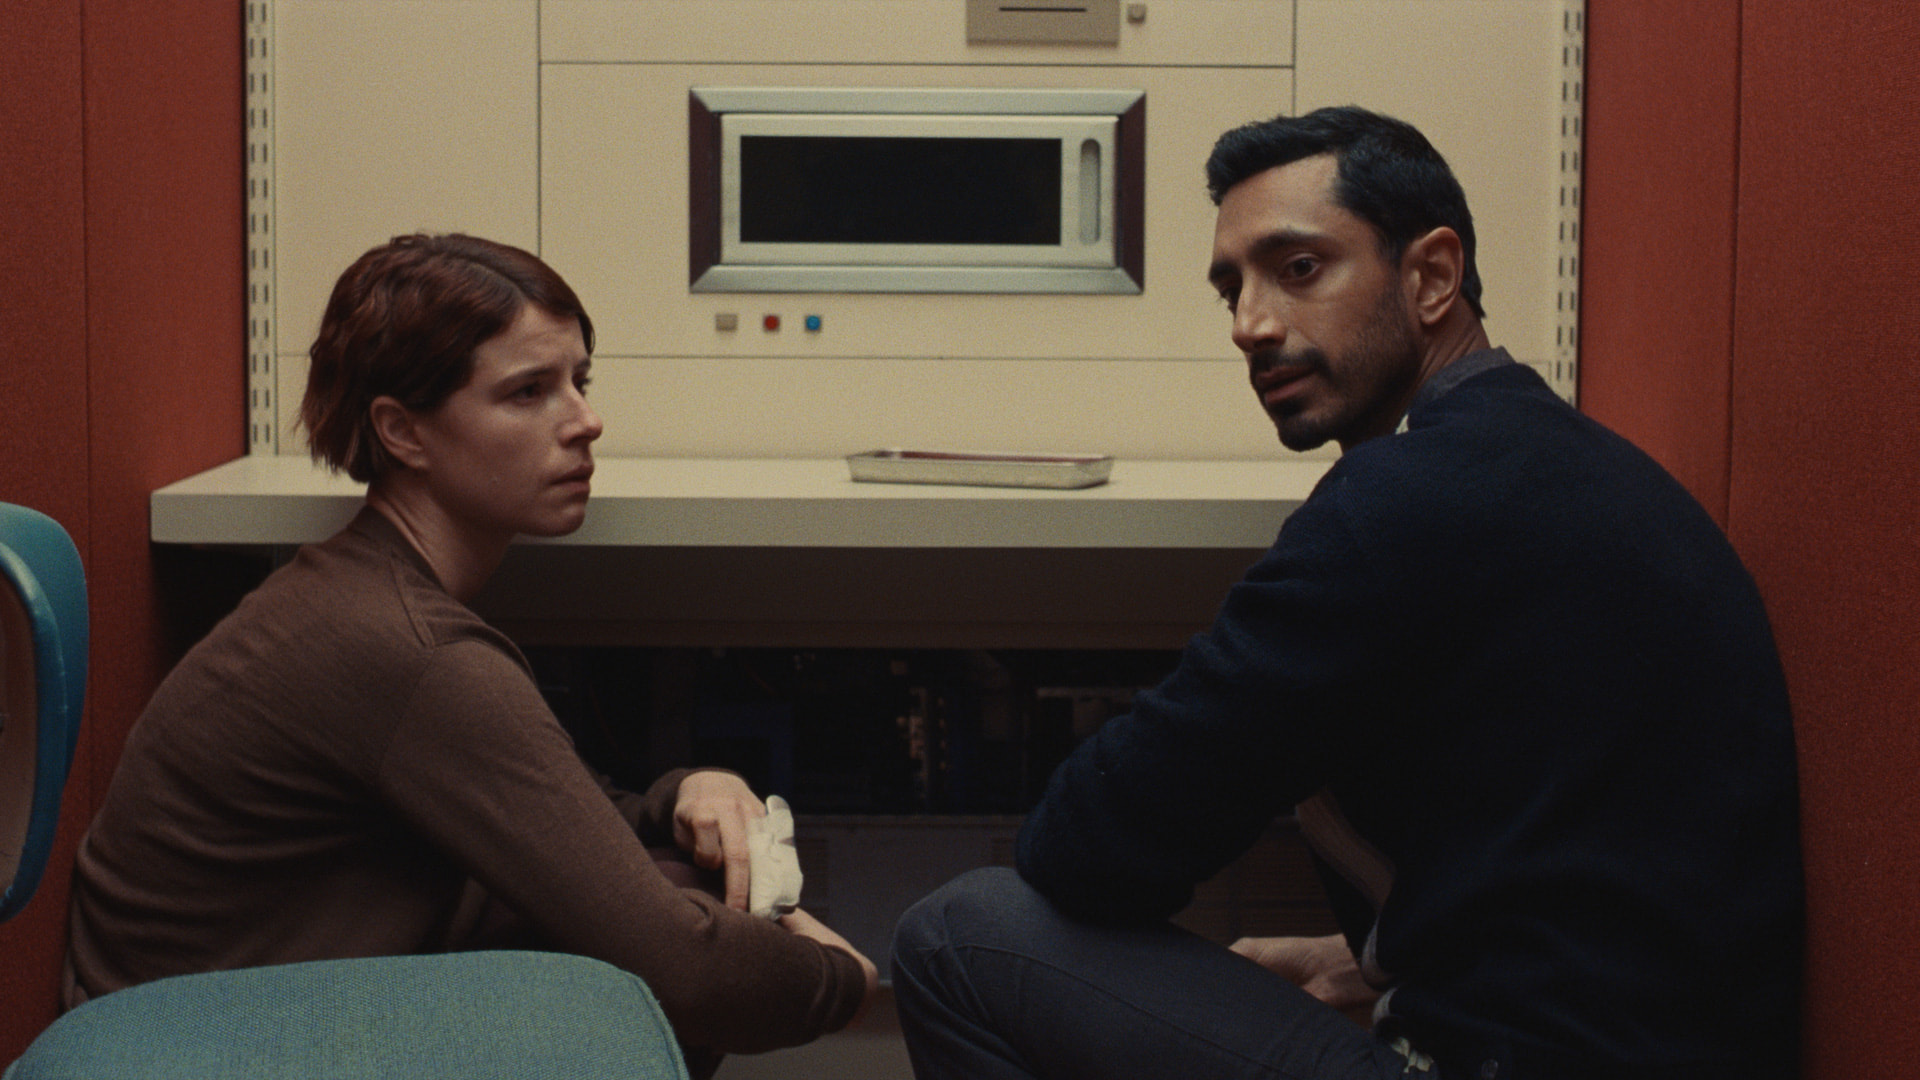 Jessie Buckley and Riz Ahmed in a futuristic home in 'Fingernails'